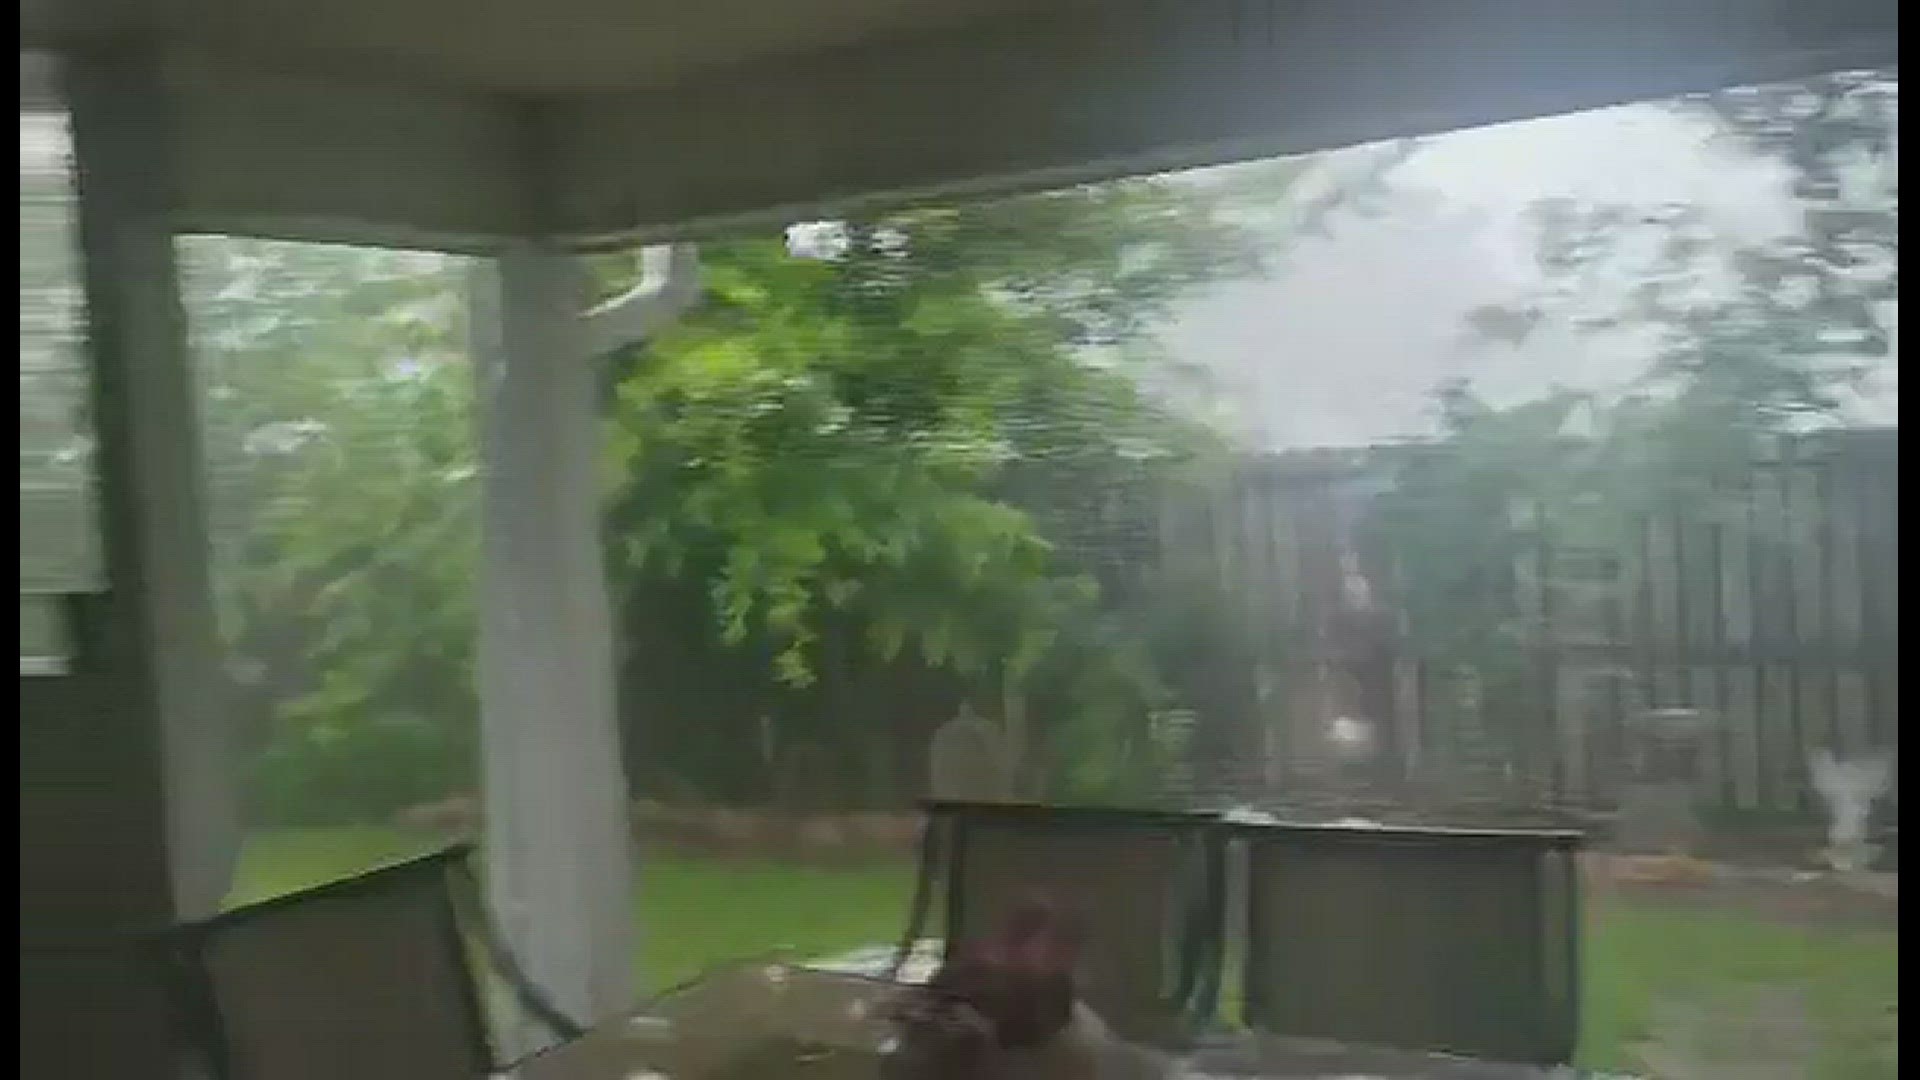 KHOU 11 News viewer Dorothy Pickering sent us this video from the Pelican Bay area of Willis in Montgomery County.